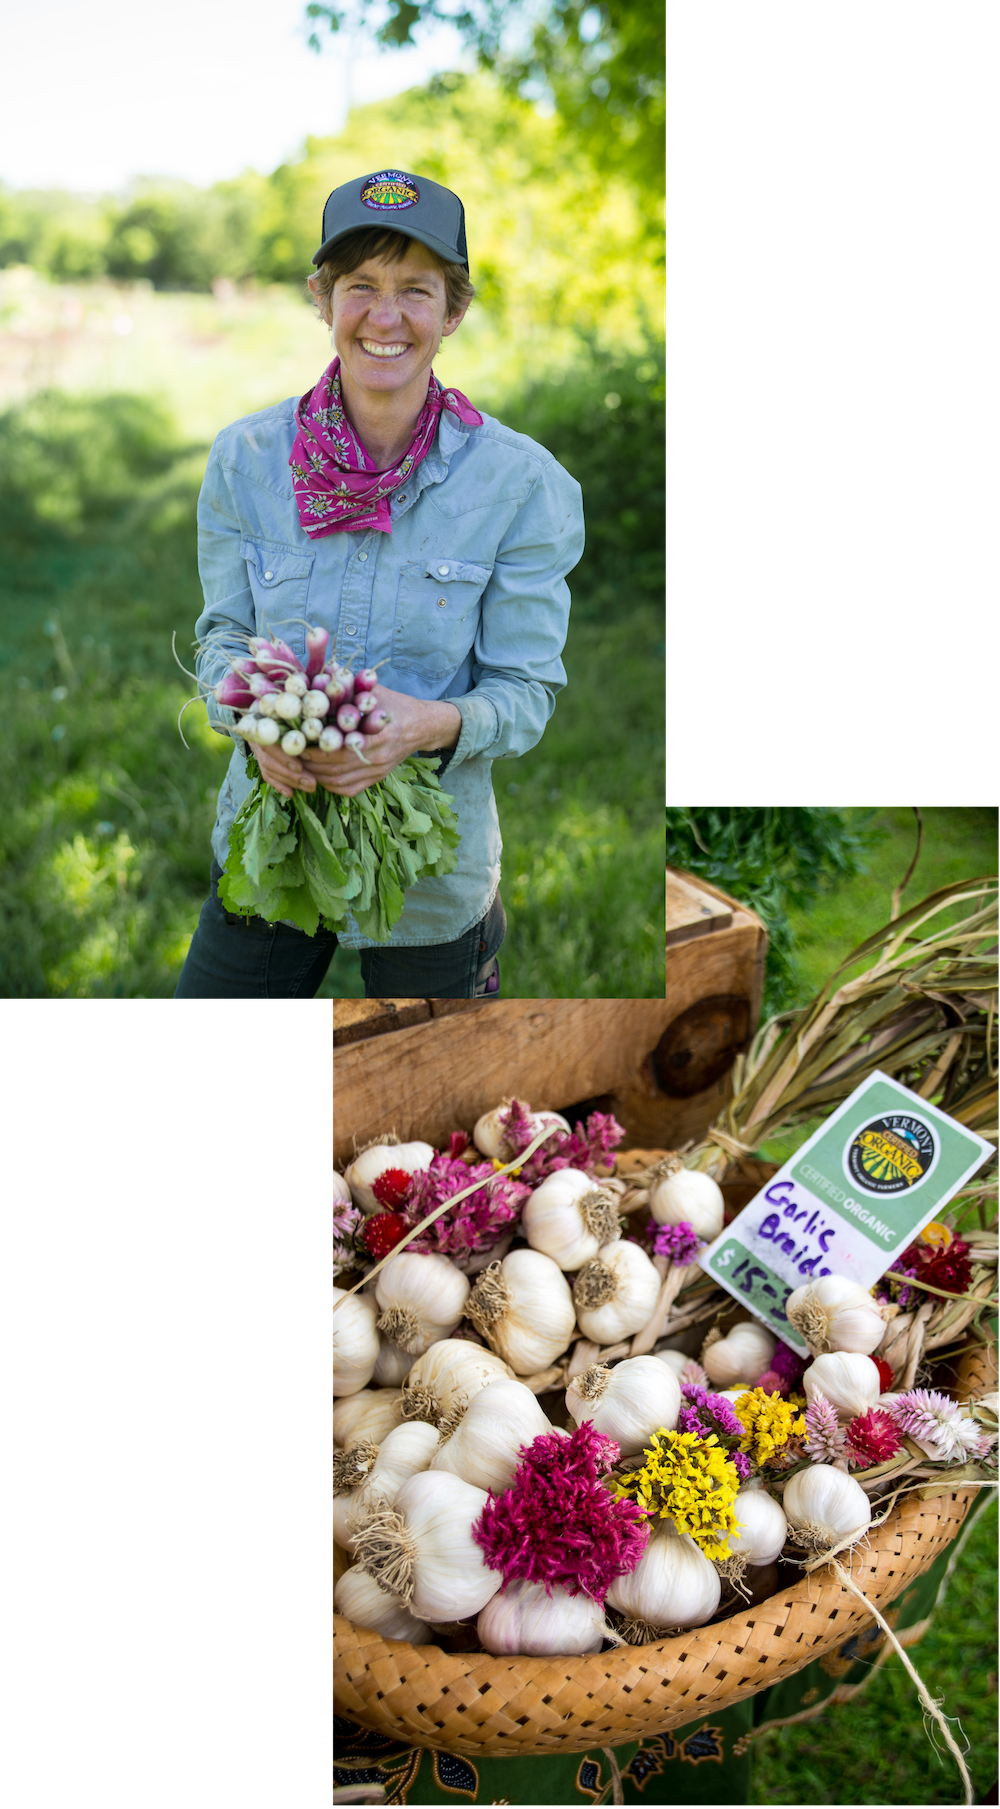 Collage of two photos. First photo is of a farmer smiling and wearing a VOF hat. Second photo is of a basket of garlic with the VOF seal.